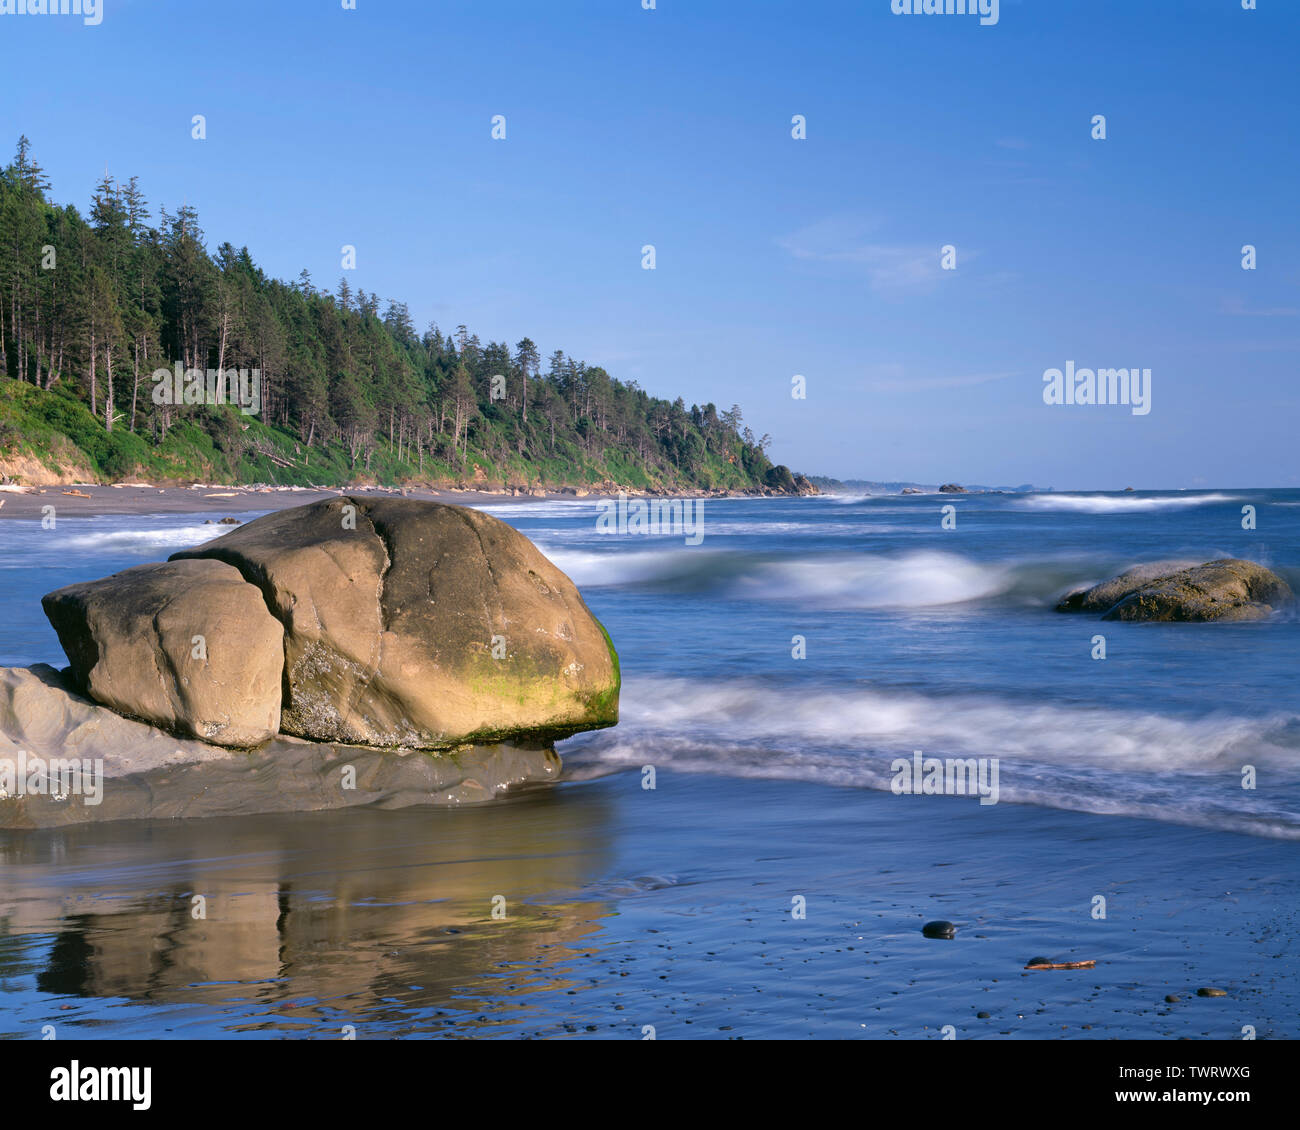 USA, Washington, Olympic National Park, Incoming waves, rocks and forested shoreline to the south at Beach 4. Stock Photo